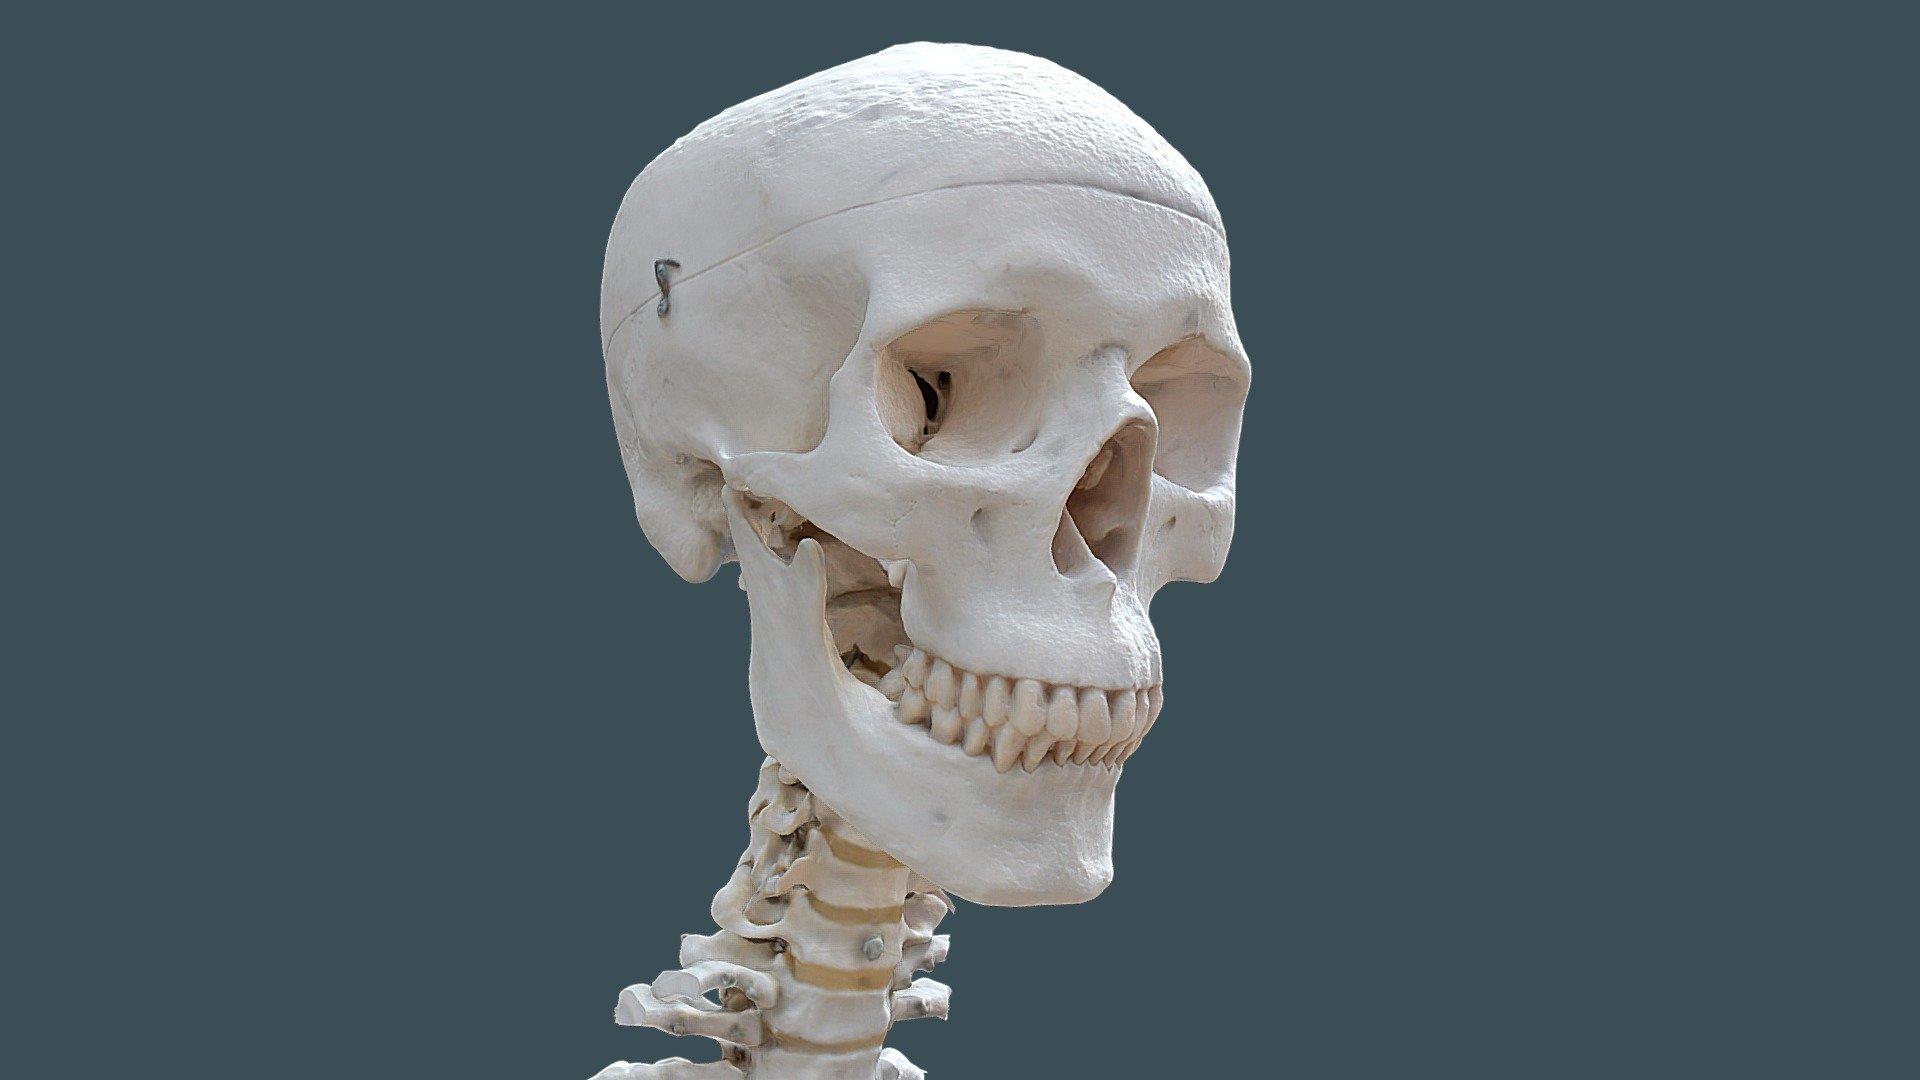 Human skull and neck